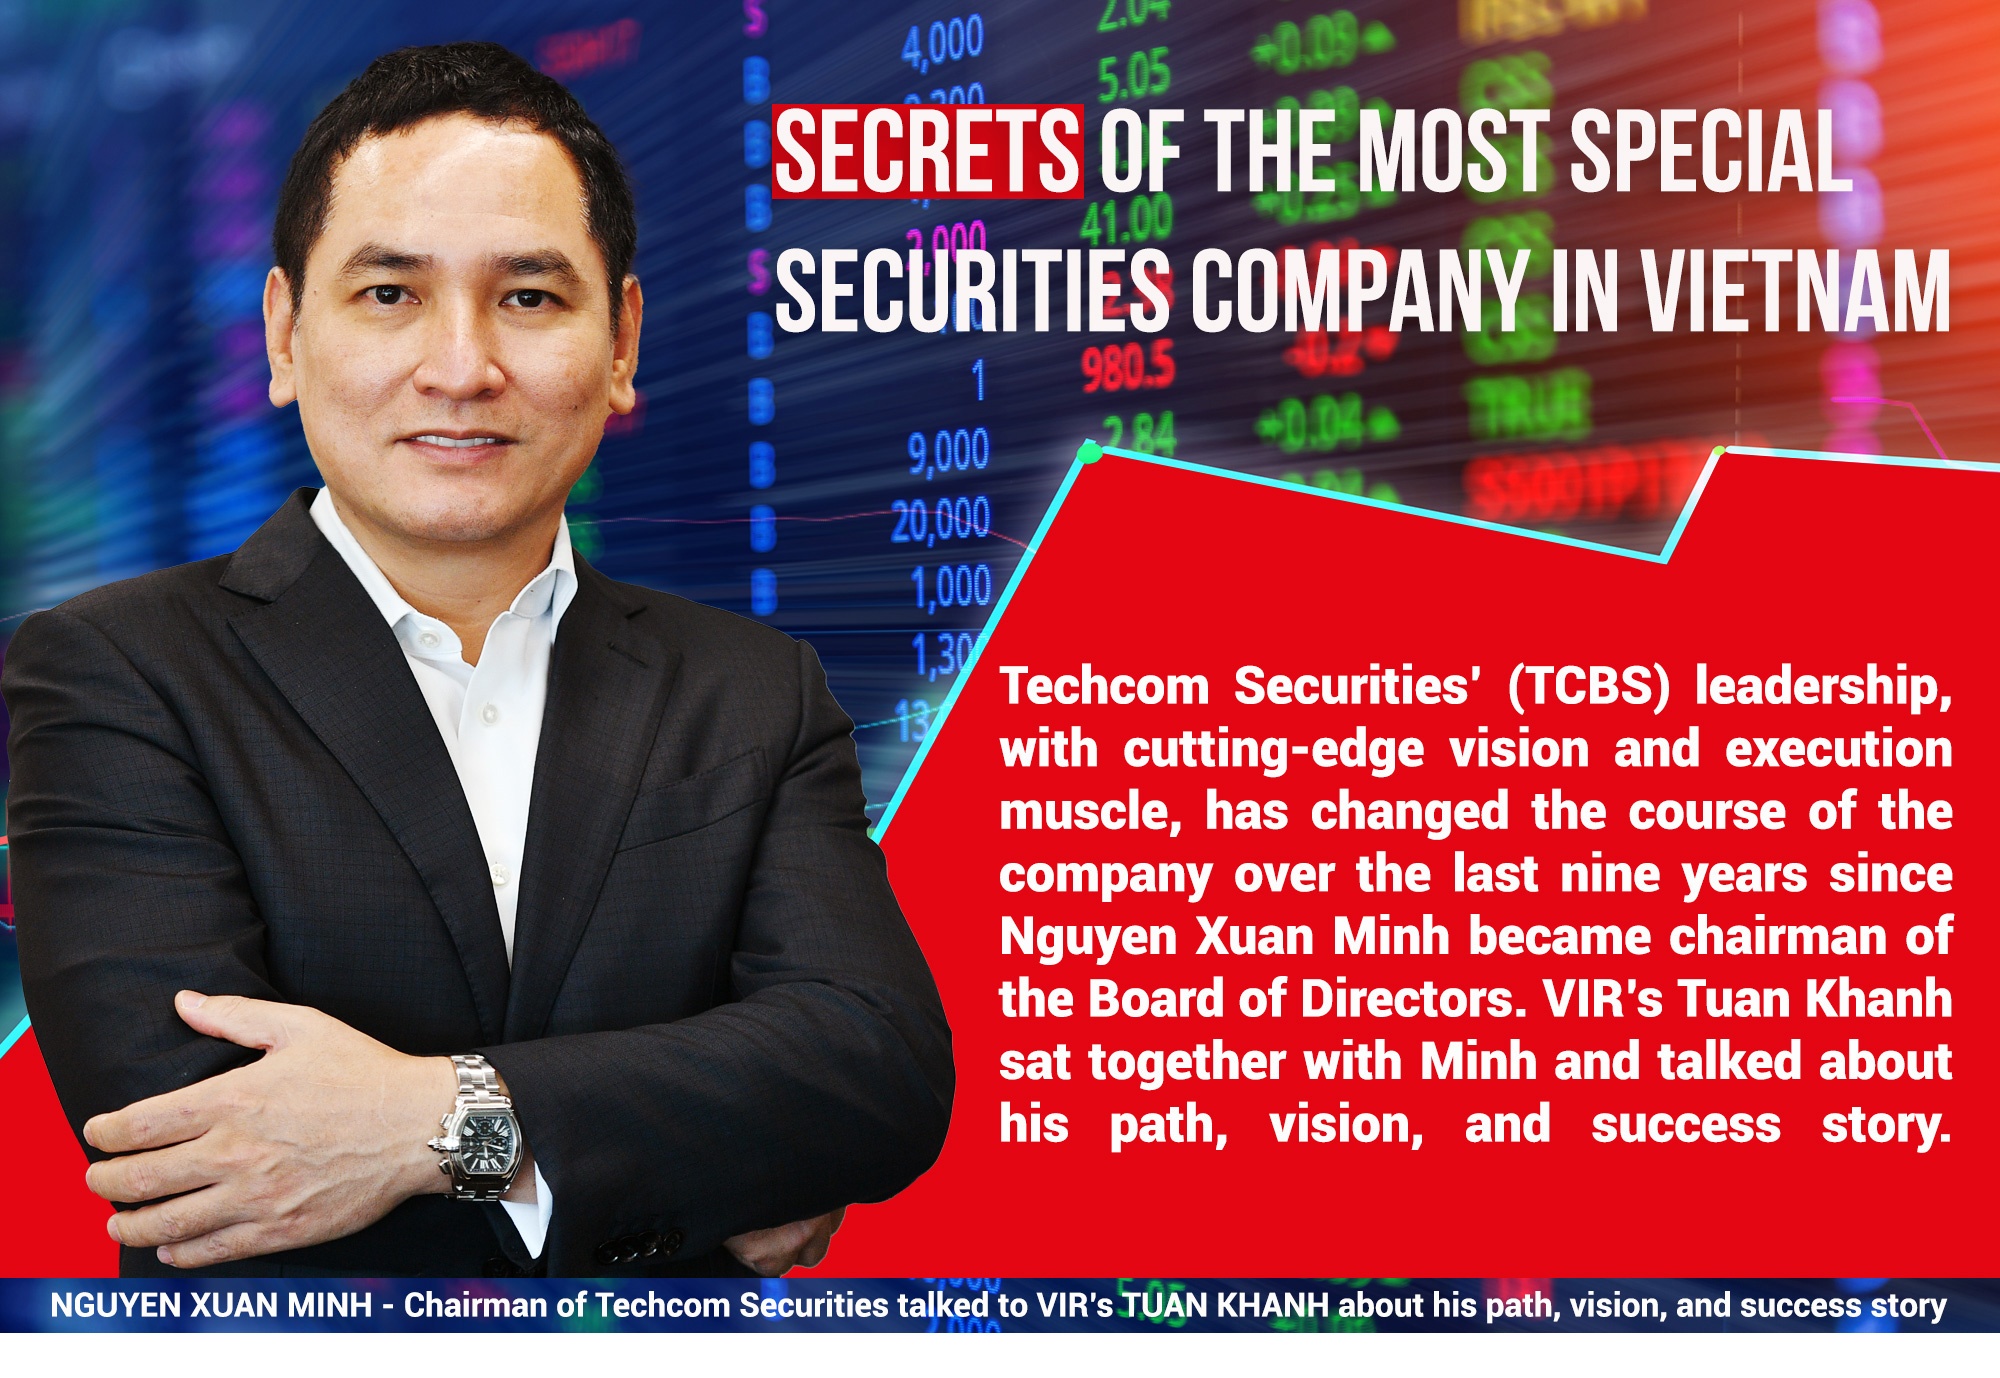 Secrets of the most special securities company in Vietnam